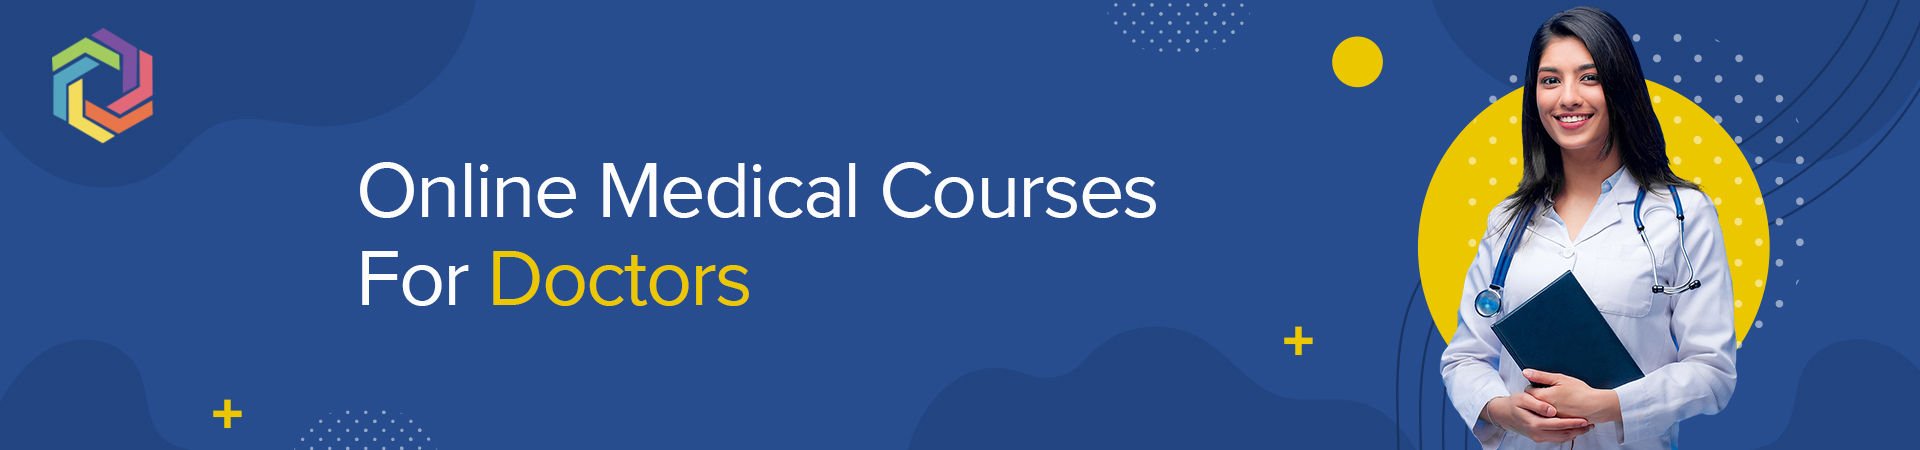 Medical courses for doctors